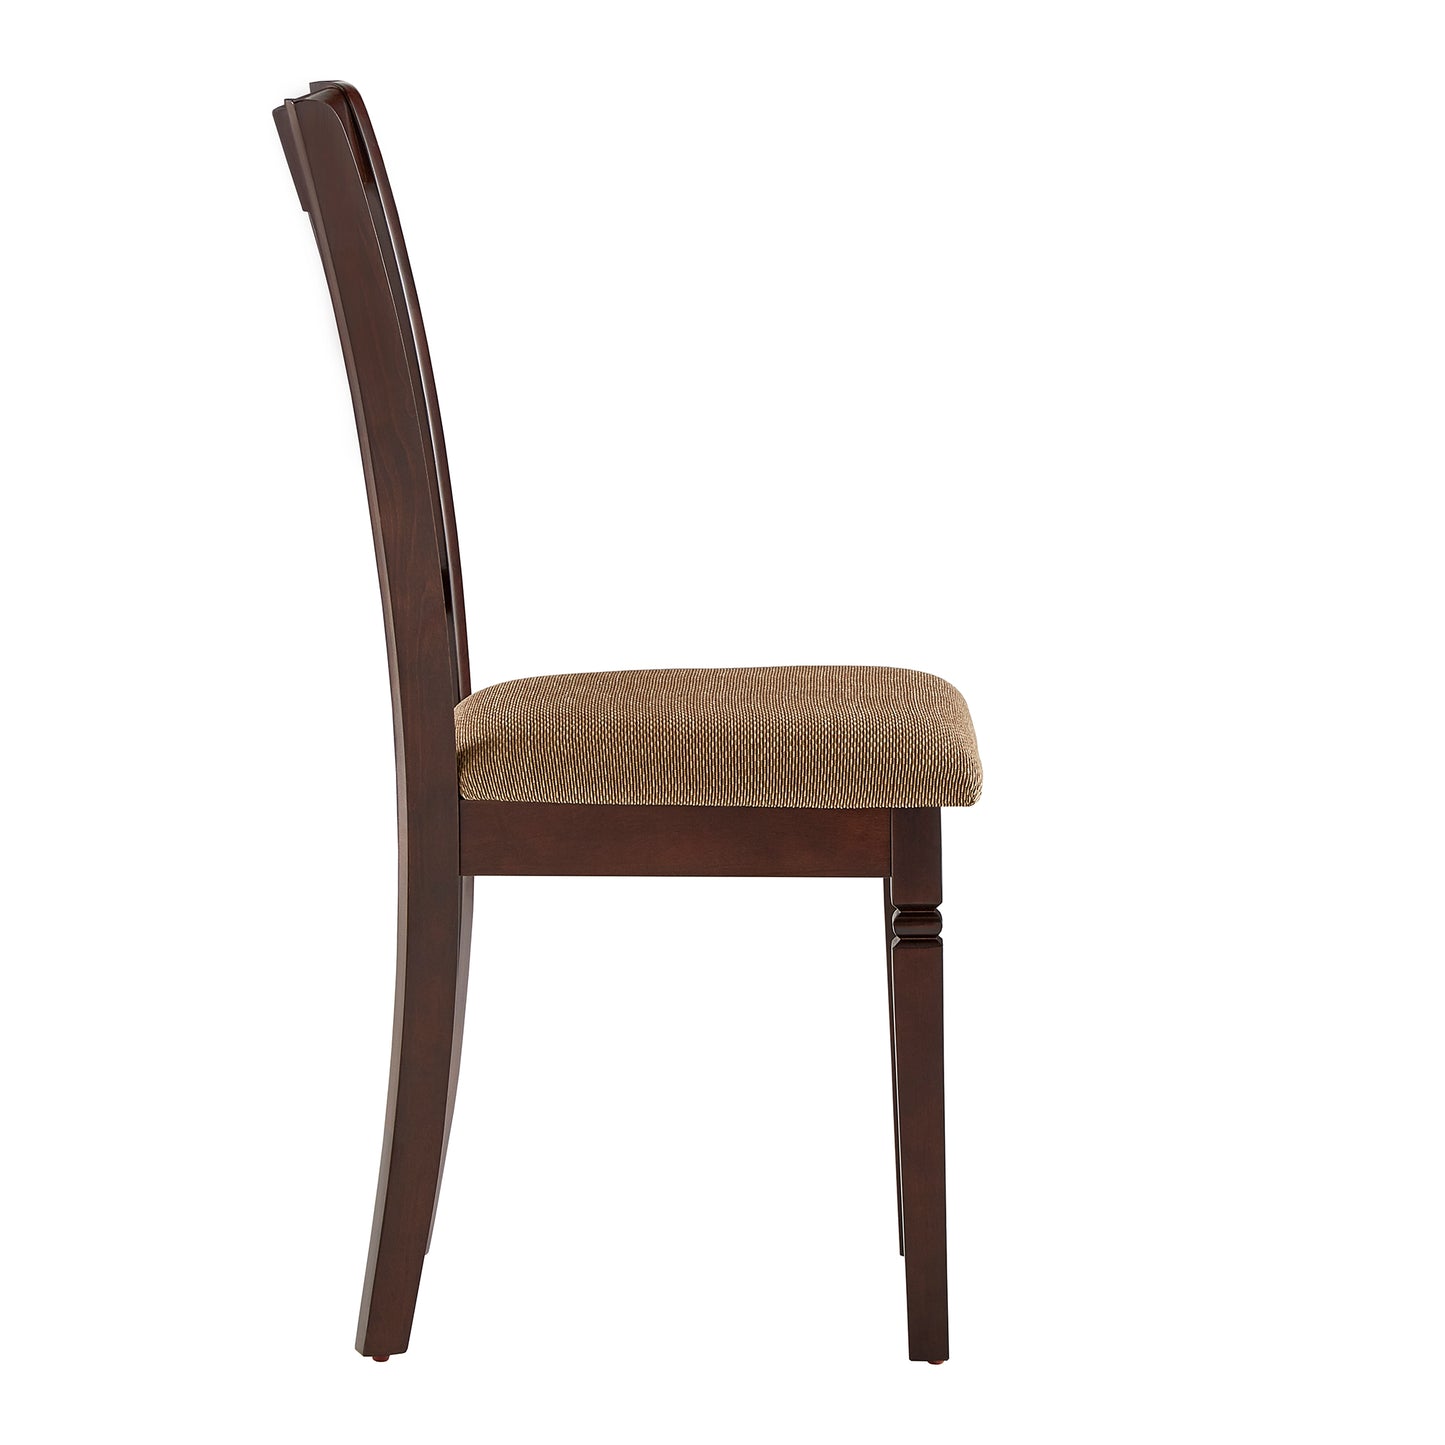 Espresso Finish Upholstered Dining Chairs (Set of 2)